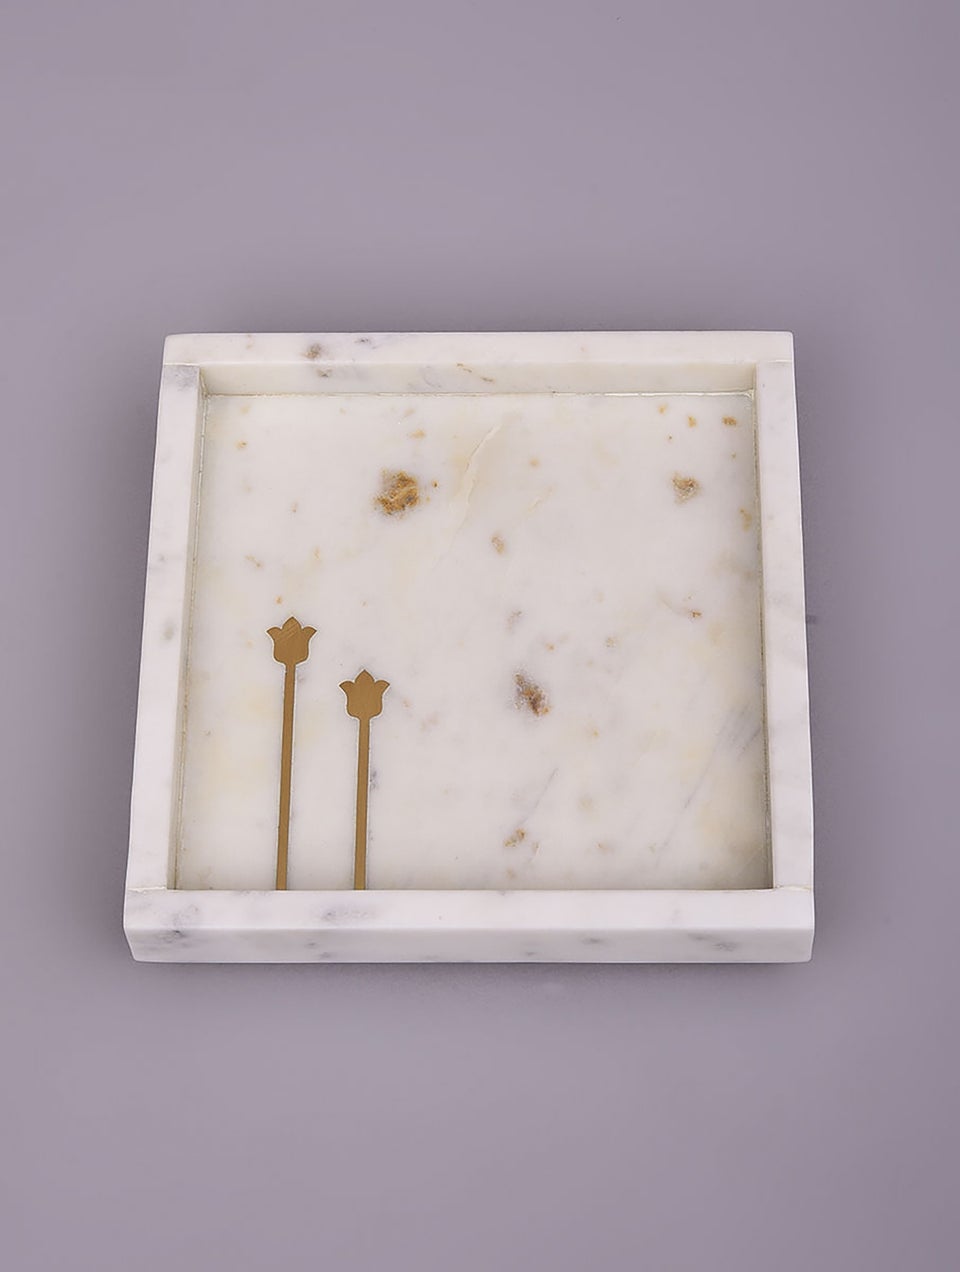 Handcrafted White Marble Utility Tray With Brass Inlay